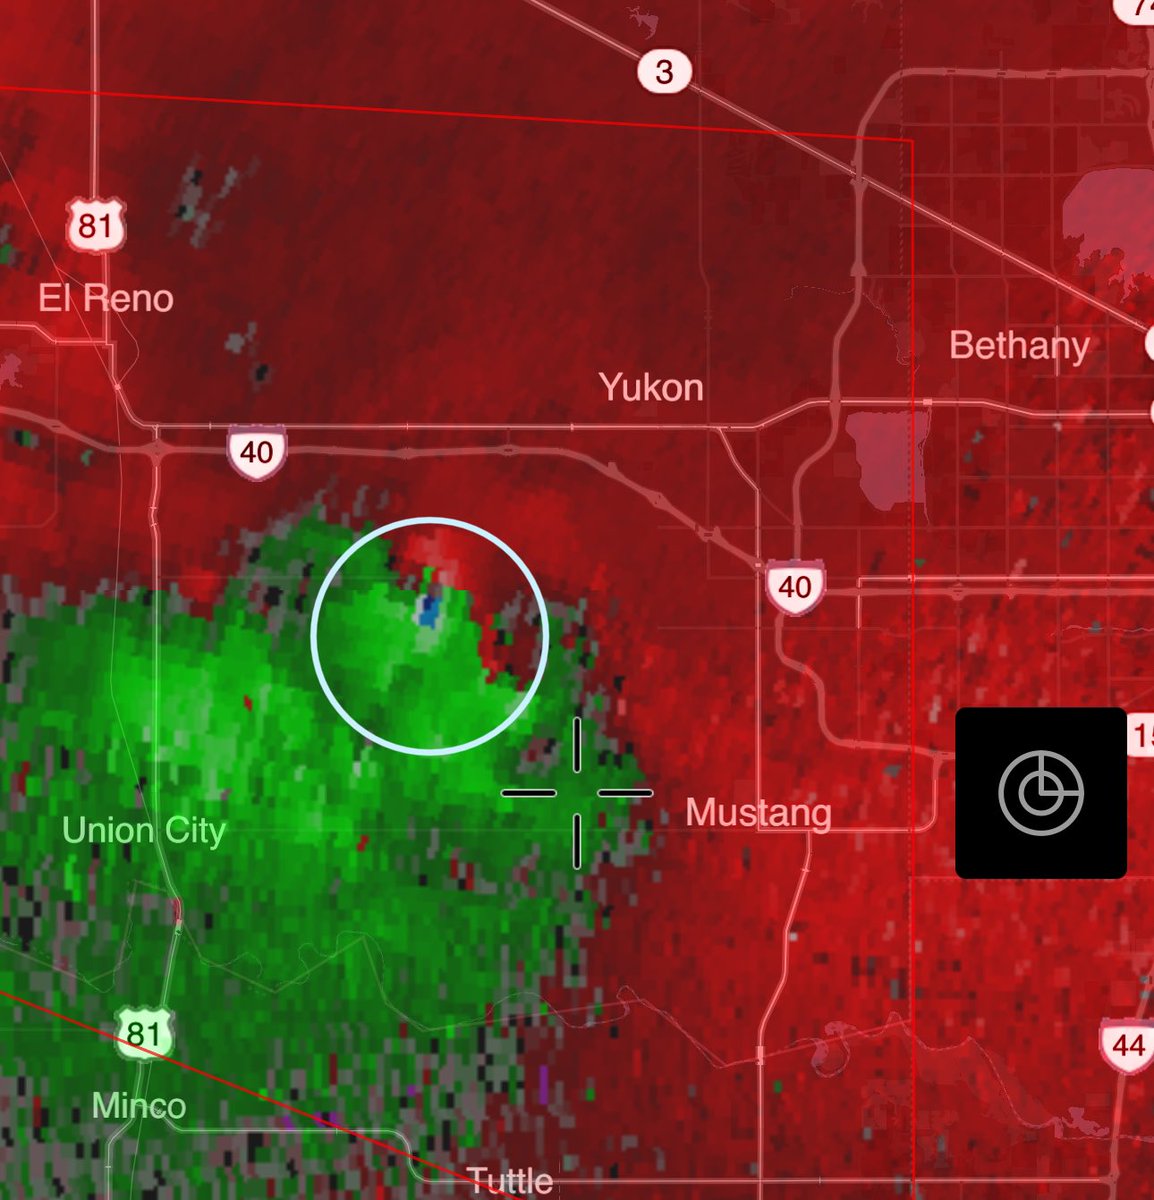 Strong #tornado approaching Yukon, Oklahoma right now! Seek shelter NOW. About to pass near where I-40 meets the Kilpatrick Turnpike! @MyRadarWX